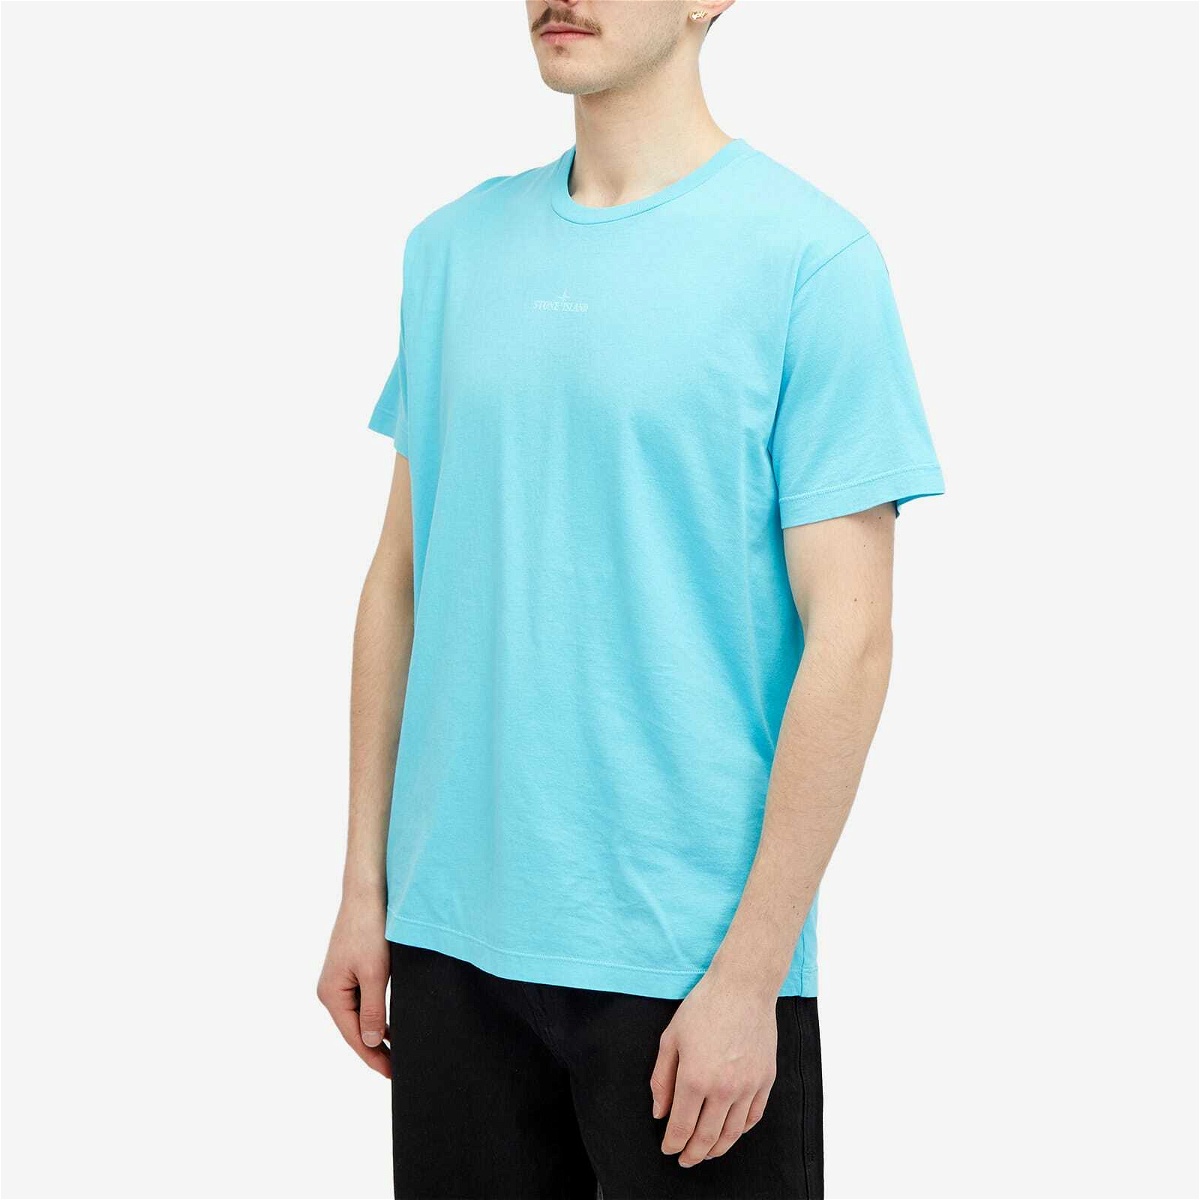 Stone Island Men's Abbreviation Three Graphic T-Shirt in Turquoise